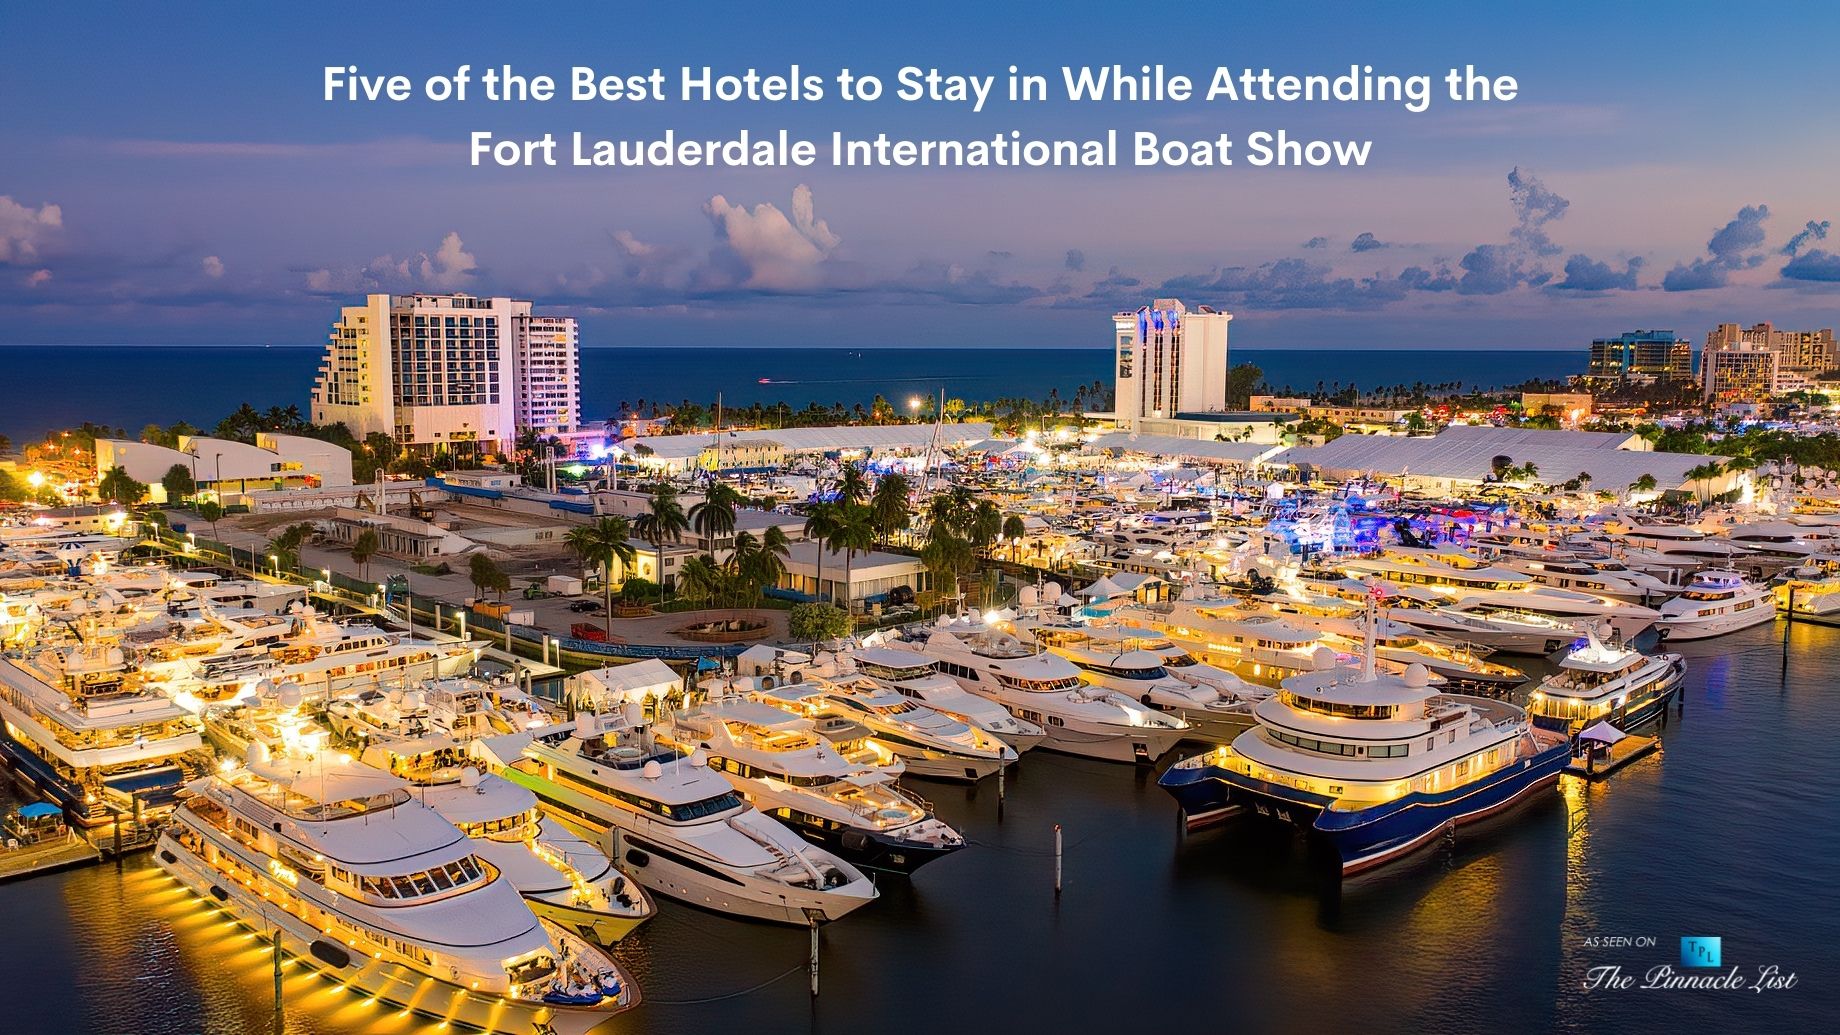 Five of the Best Hotels to Stay in While Attending the Fort Lauderdale International Boat Show